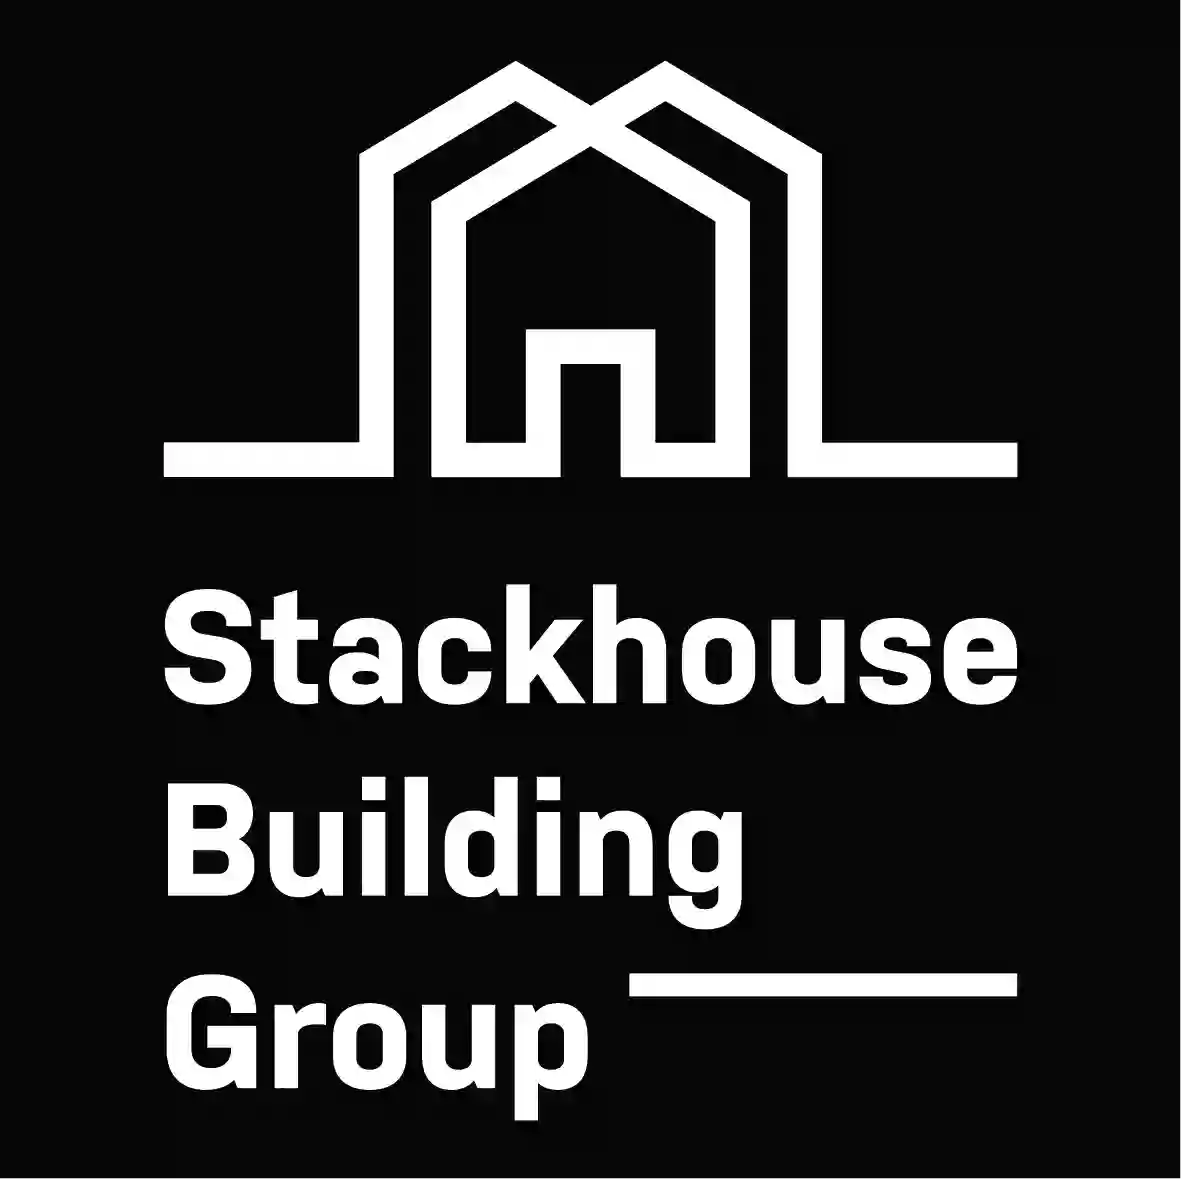 Stackhouse Building Group